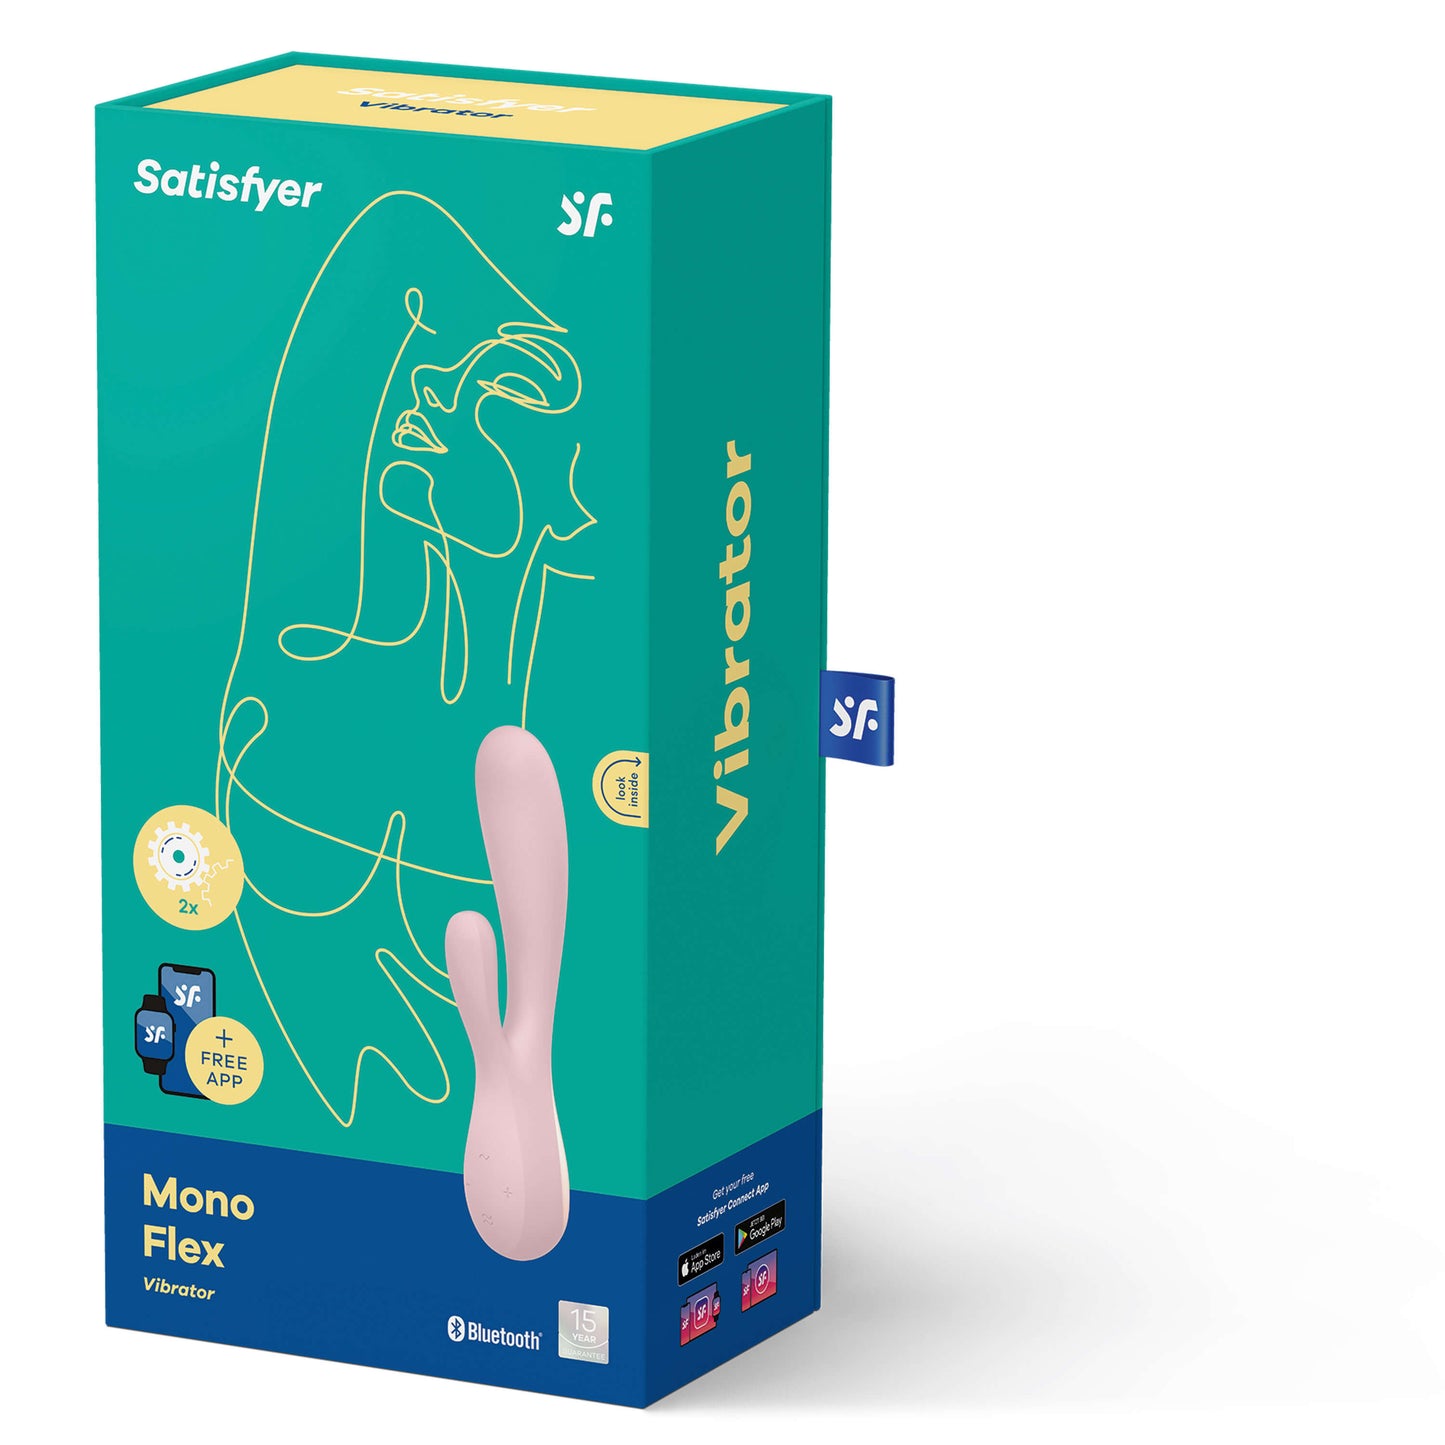 Satisfyer Mono Flex Rabbit Vibrator packaging - by The Bigger O - an online sex toy shop. We ship to USA, Canada and the UK.